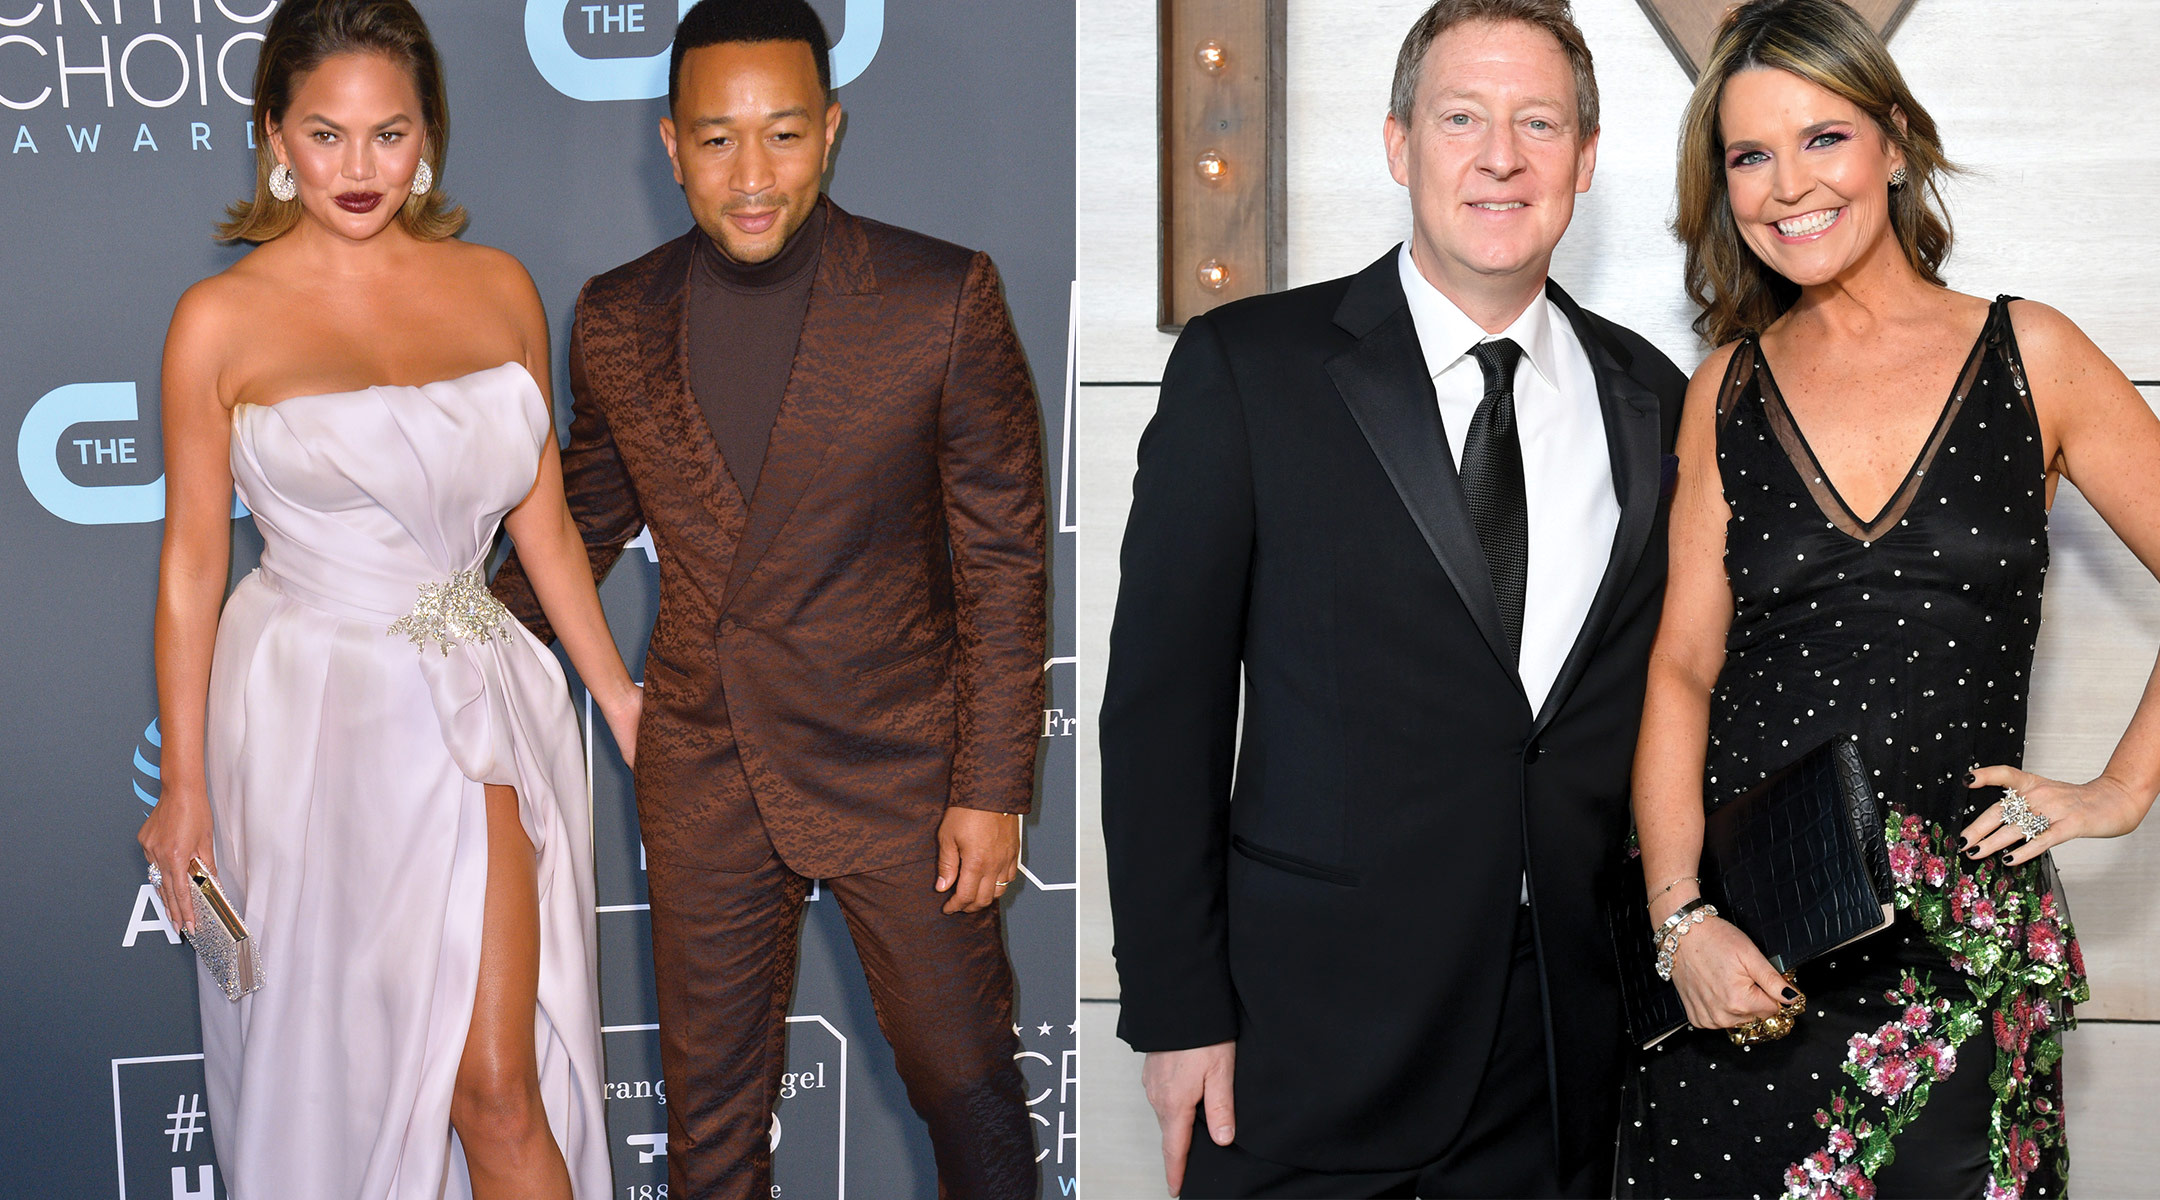 savannah guthrie and chrissy teigen with john legend, struggled with infertility